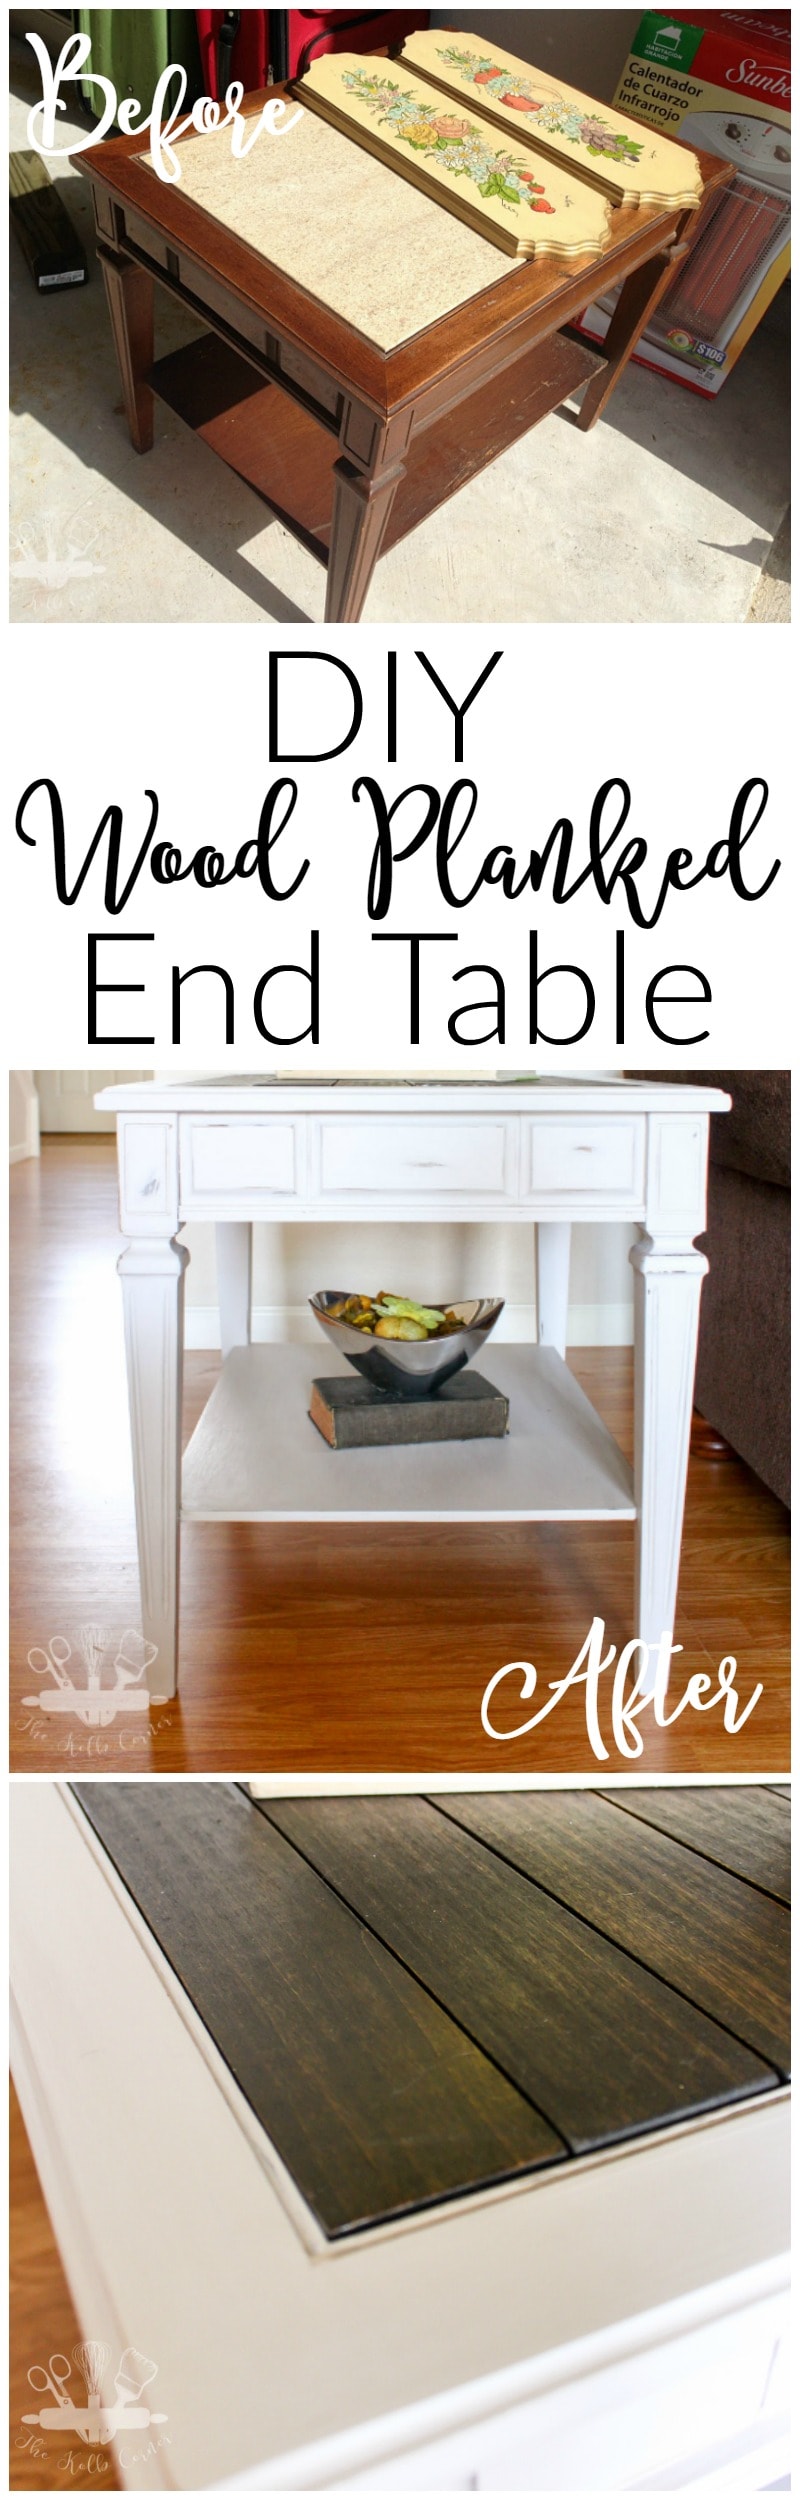 DIY Wood Planked End Table